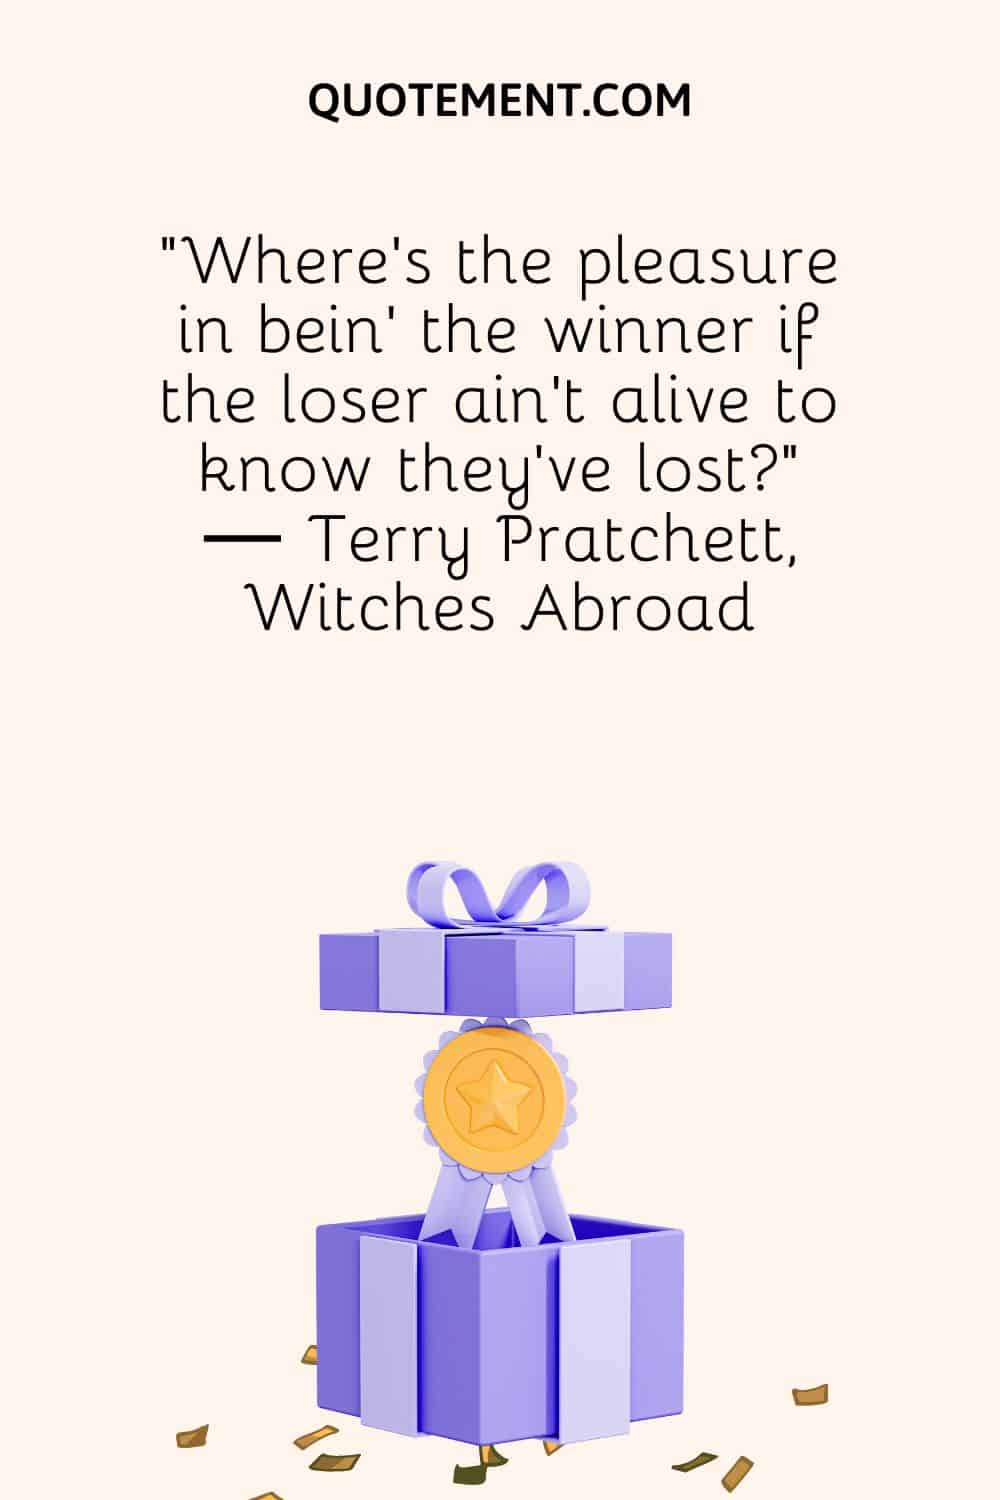 “Where's the pleasure in bein' the winner if the loser ain't alive to know they've lost” ― Terry Pratchett, Witches Abroad